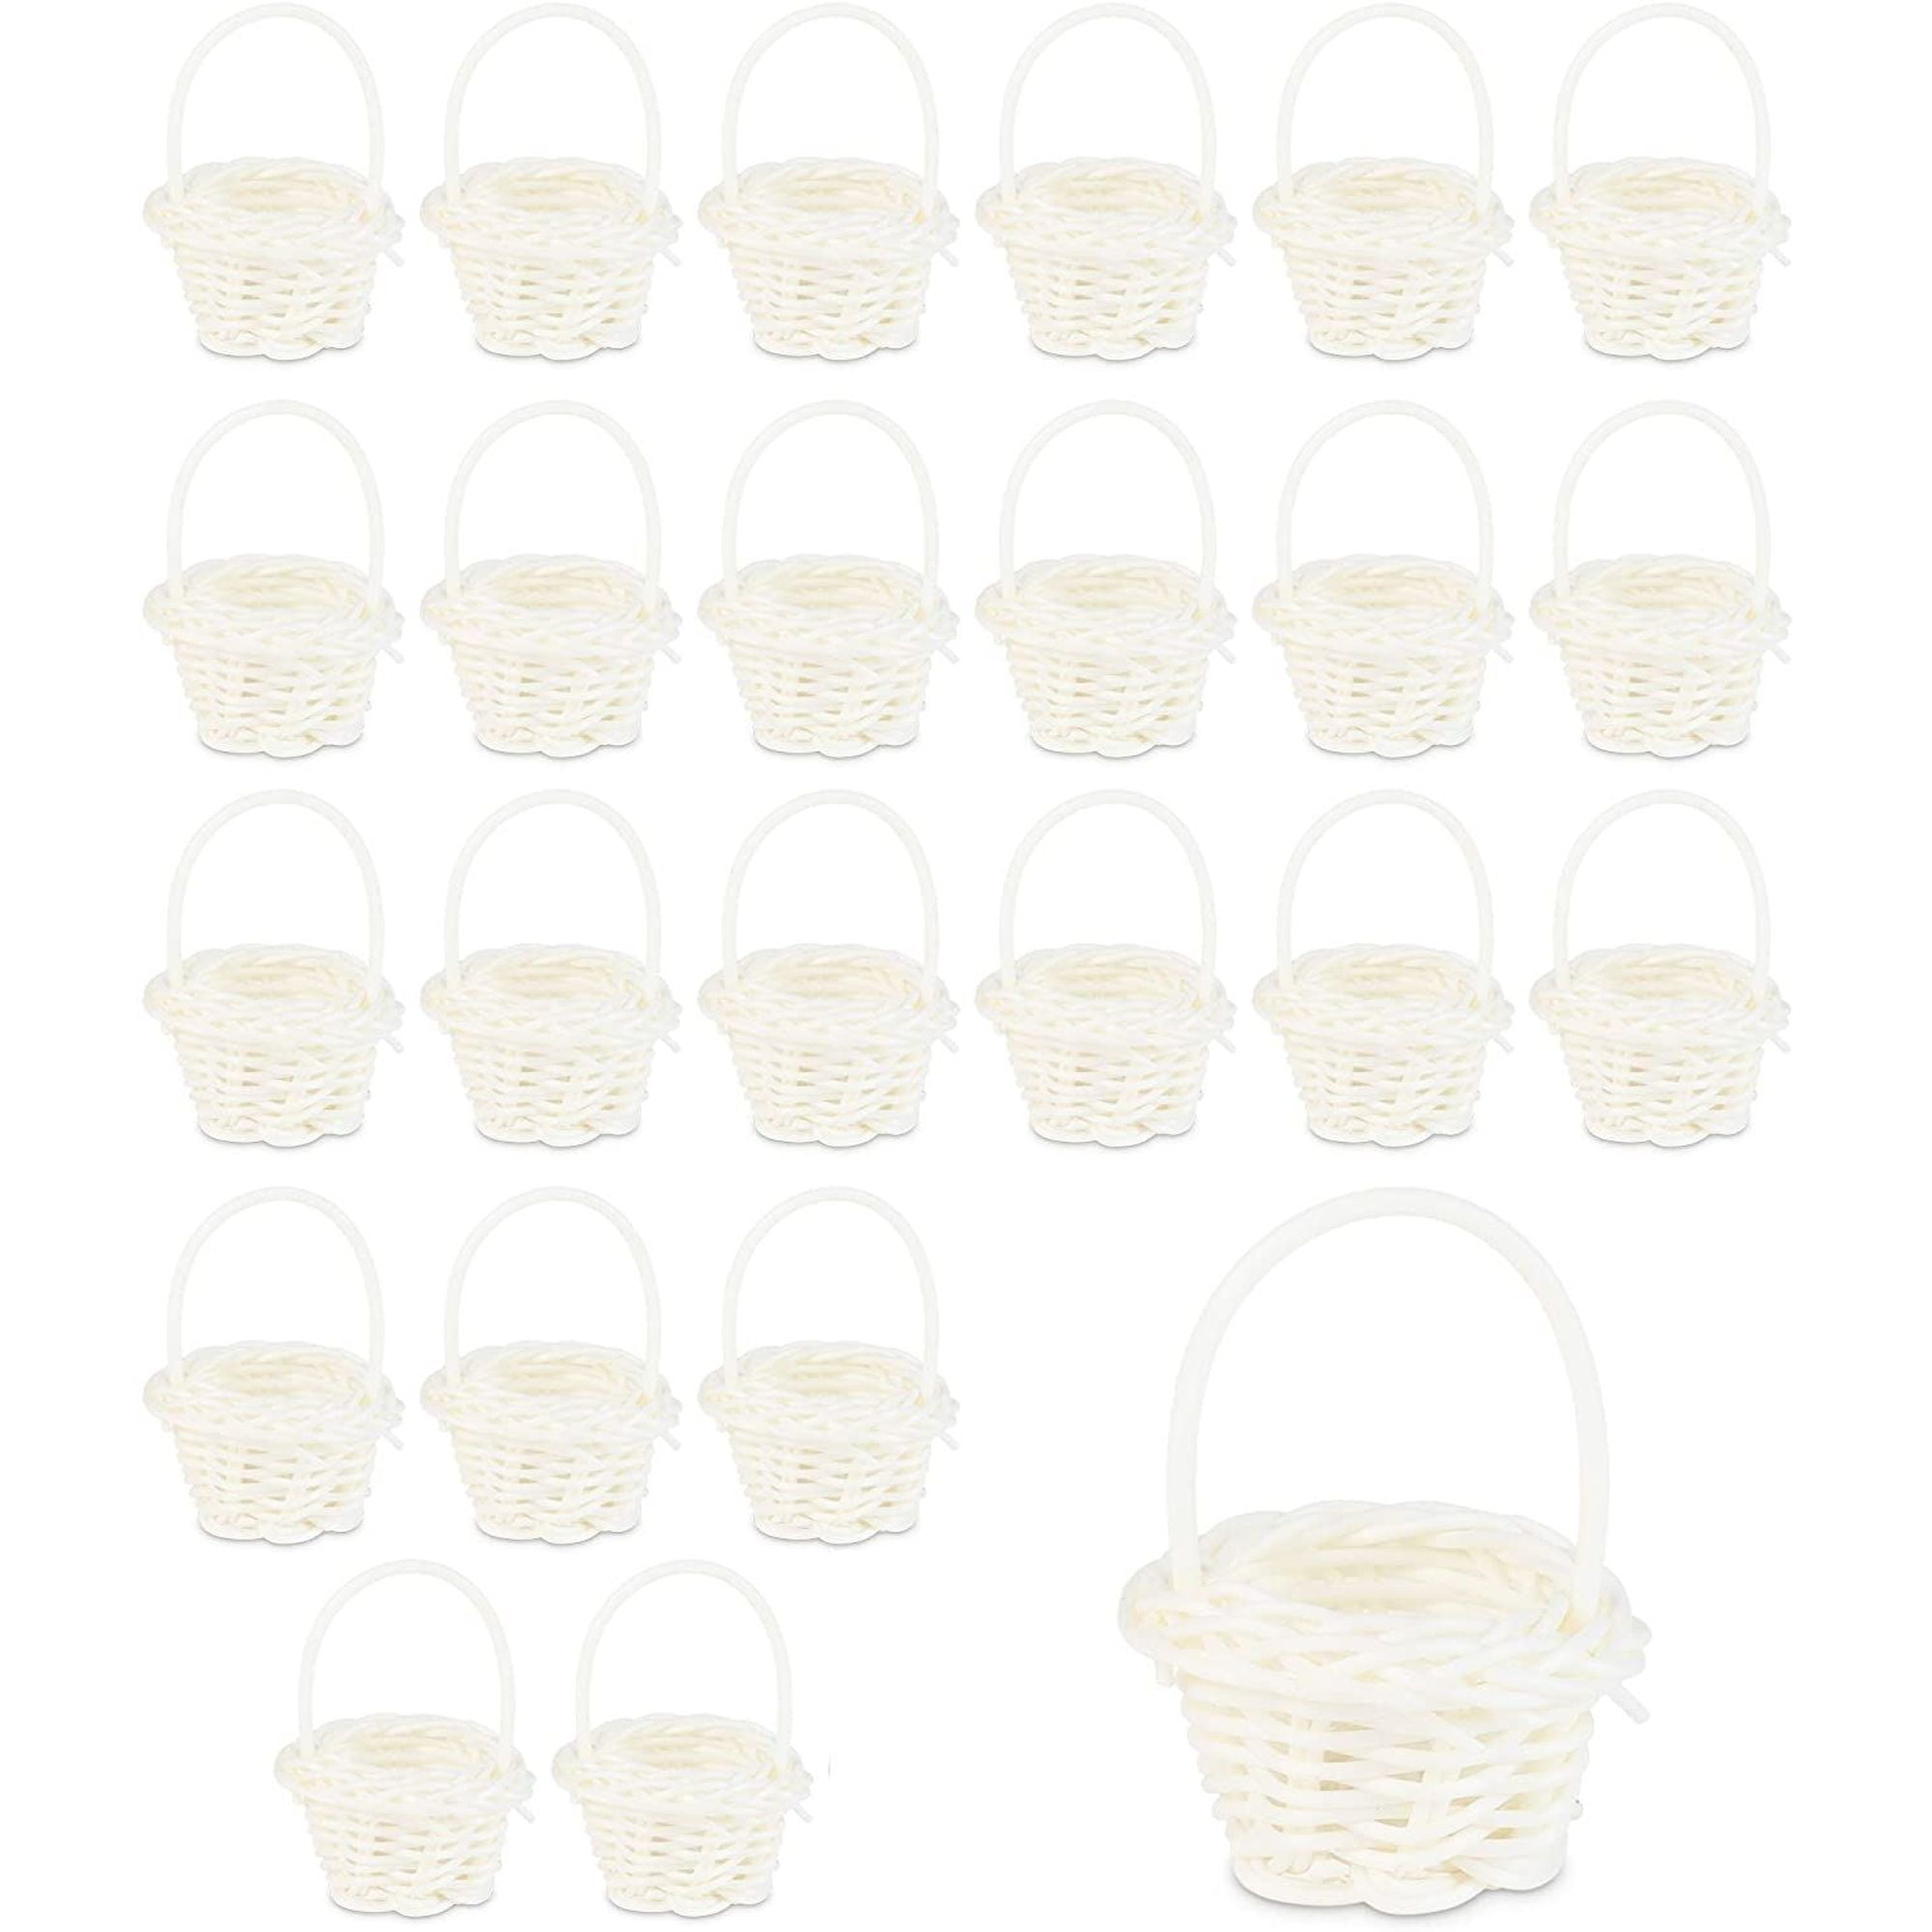 Juvale 24-Pack Mini Woven Wicker Storage Basket Bins with Handles, White 1.75"x2.75"